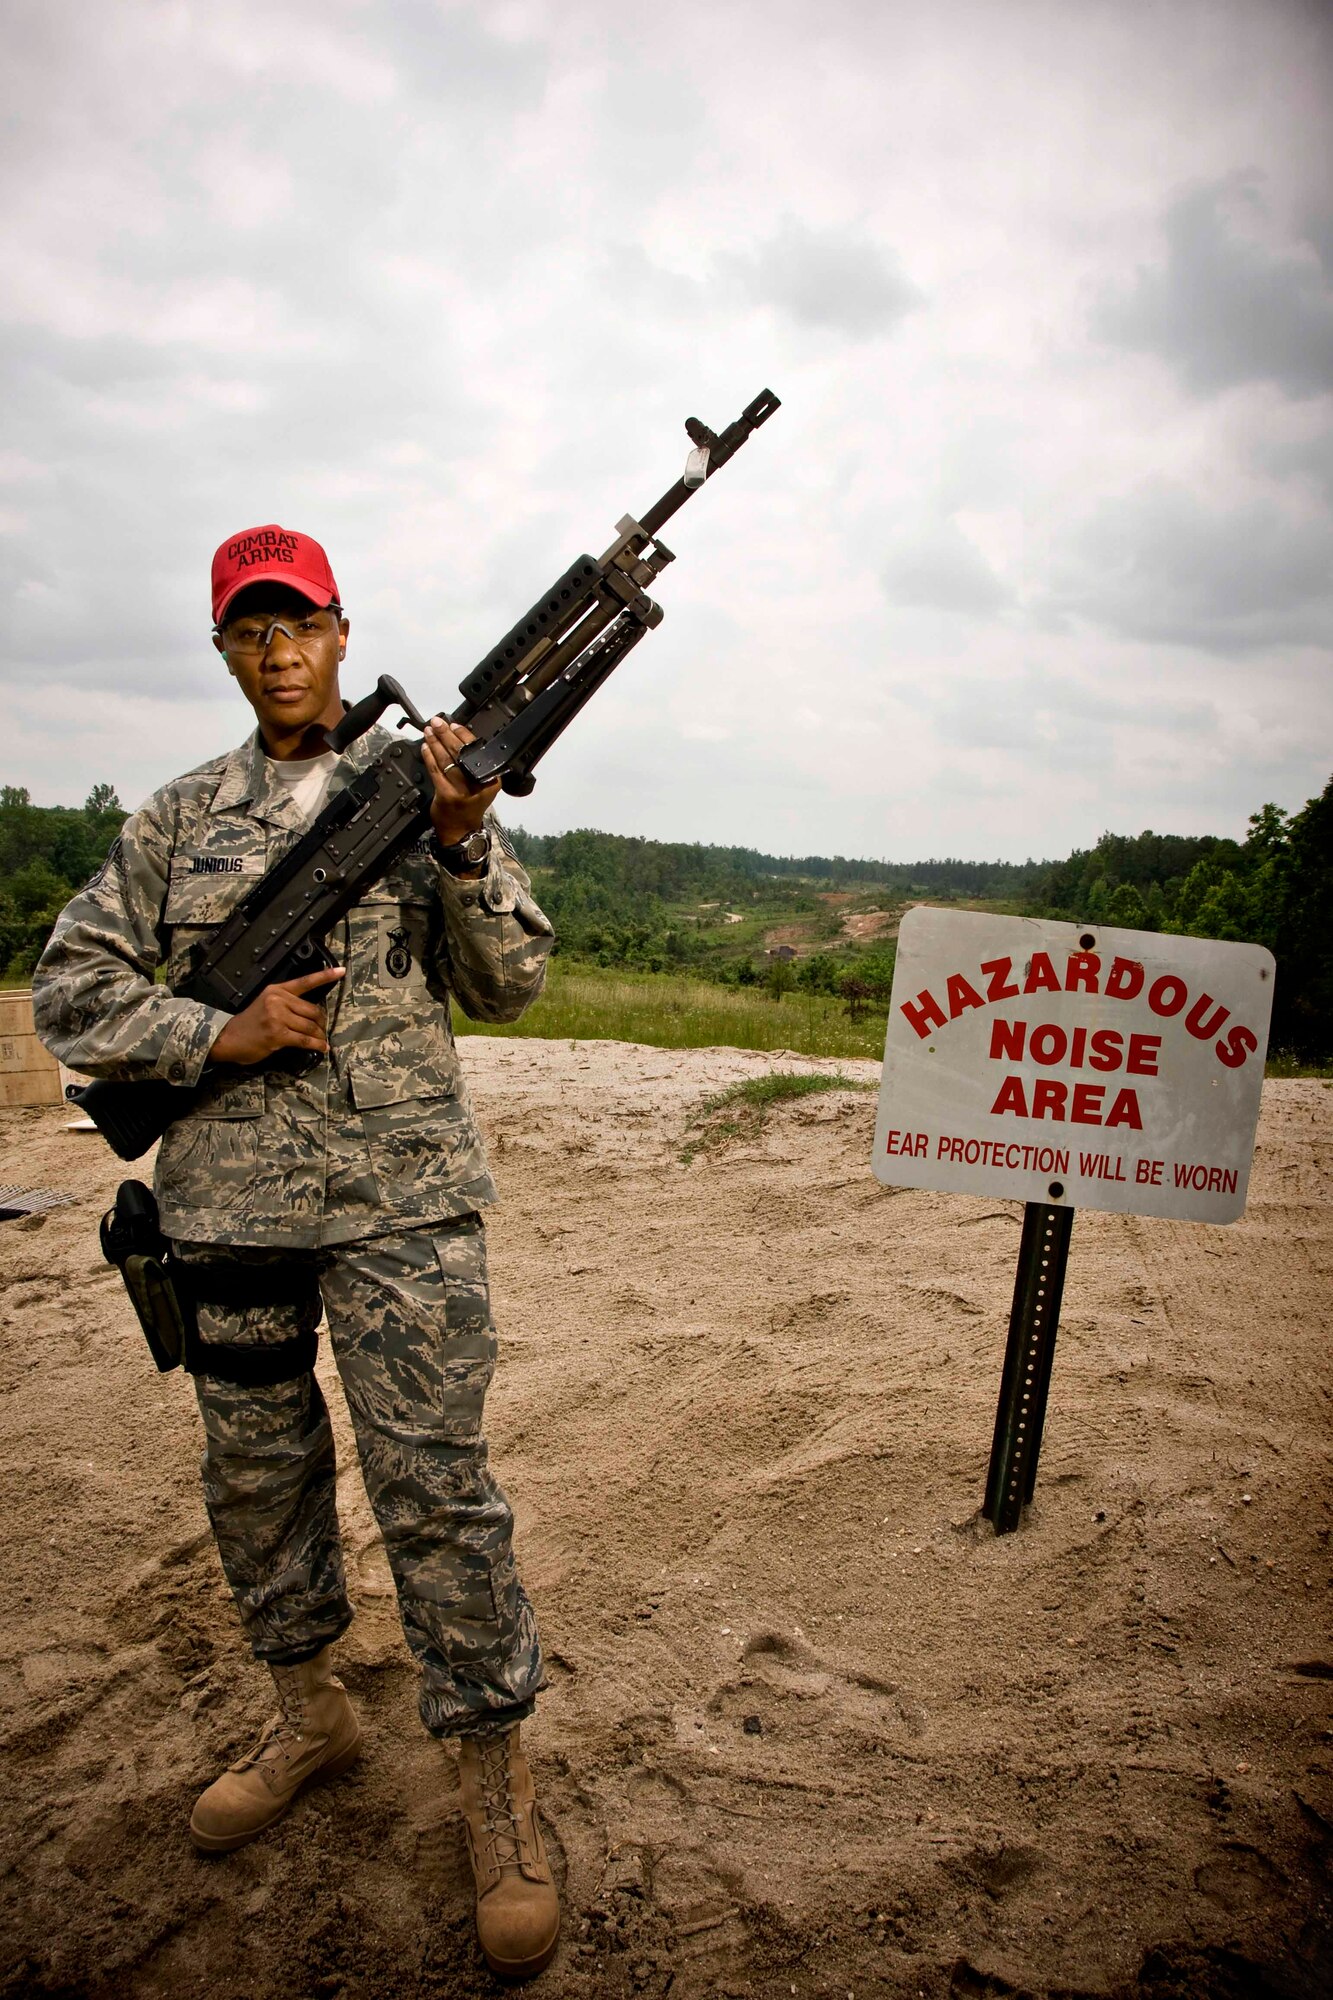 Tech Sgt. Sharese Junious serves as a Combat Arms Instructor, or CATM, who routinely qualifies 459th Air Refueling Wing members in firearms training. Originally from Chicago, Sergeant Junious enlisted in 1997 and served tours in Georgia, South Korea, and Guam. She finished up her active duty commitment at what is now the 89th Airlift Wing and joined the 459th ARW in 2007. (U.S. Air Force Photo/Capt. Nick Strocchia)
